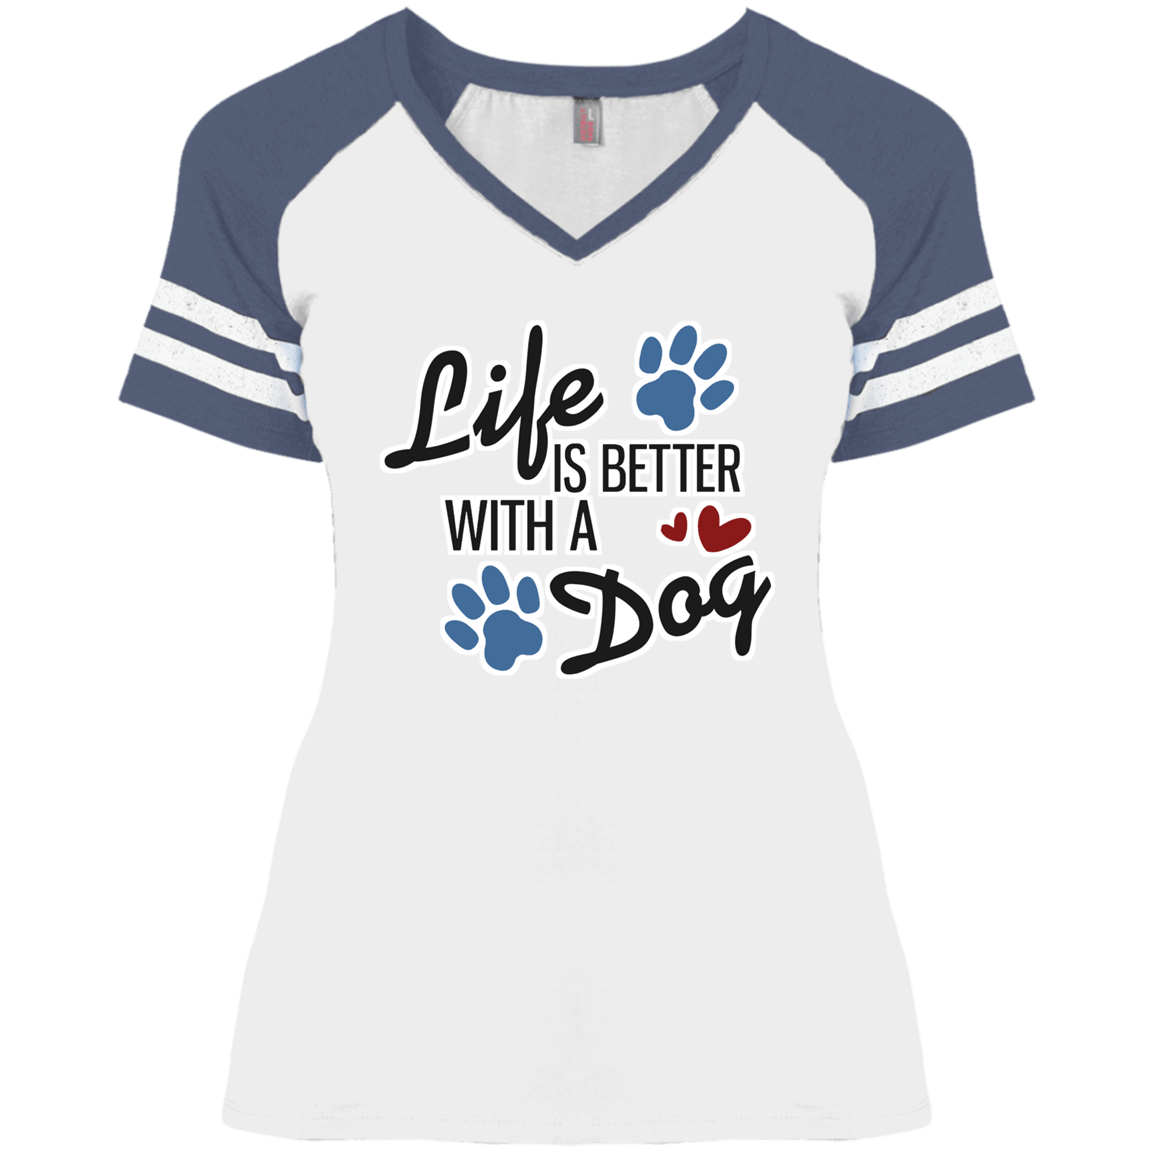 Life is Better with a Dog - Ladies Varsity V-Neck.